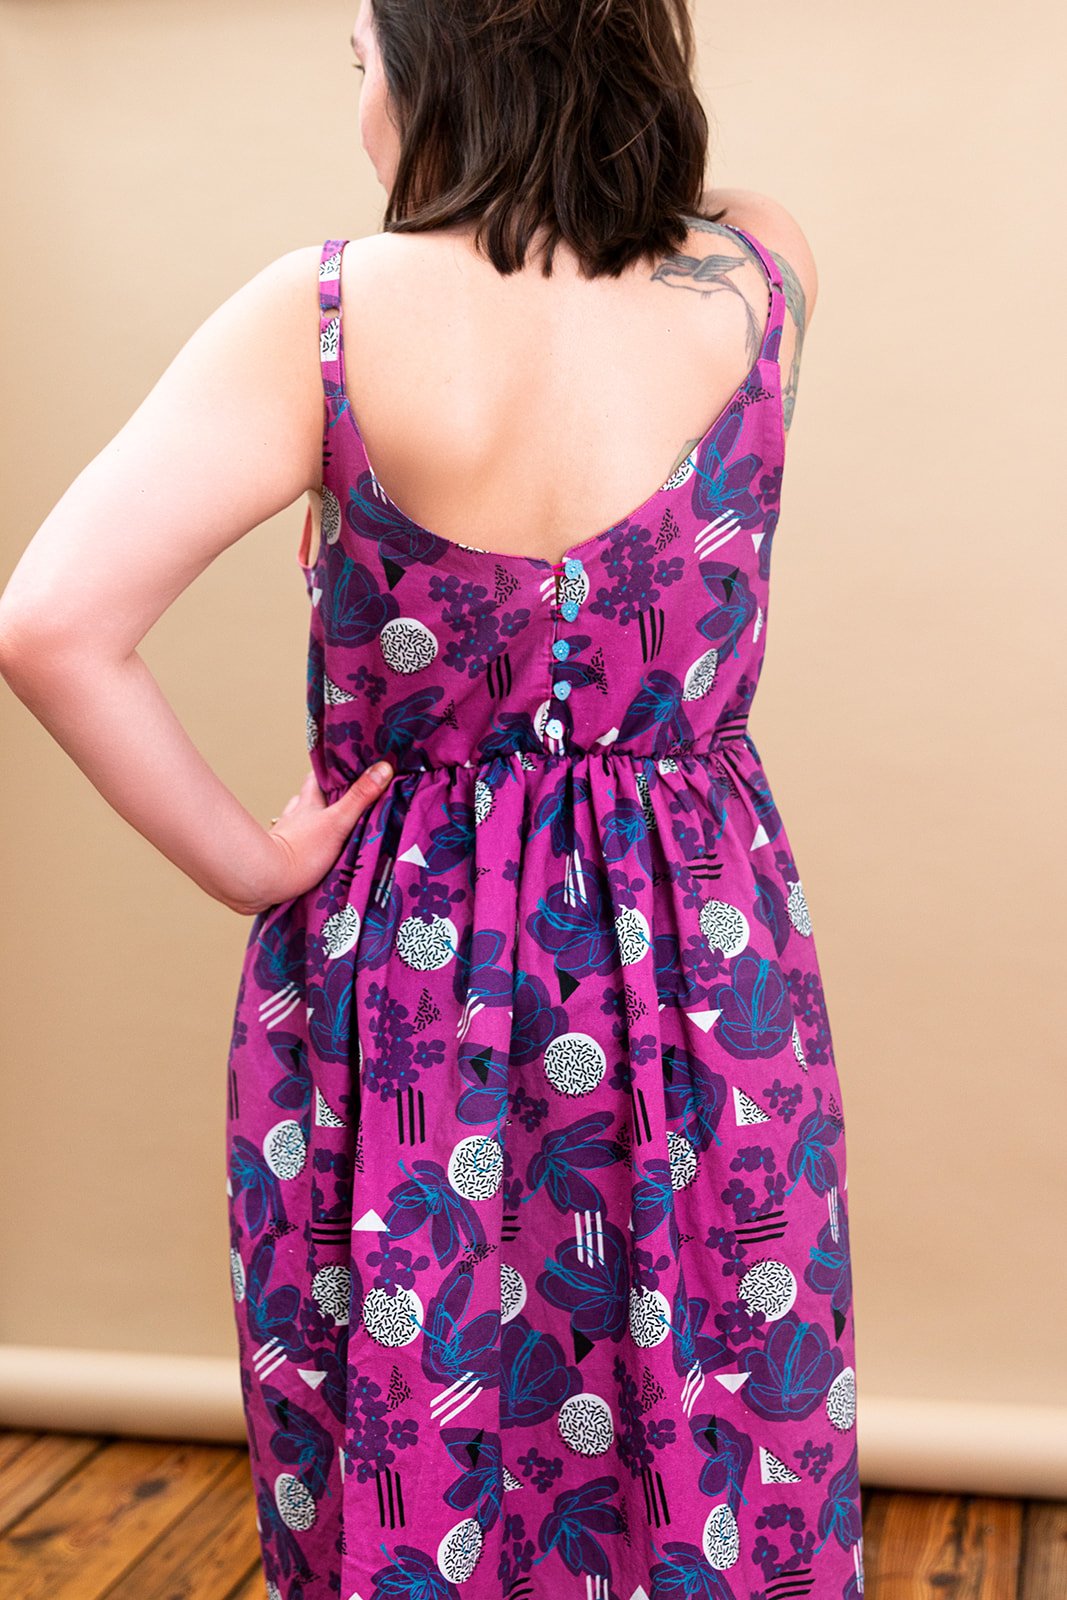 Dreaming Dress by @noaestheticquilts